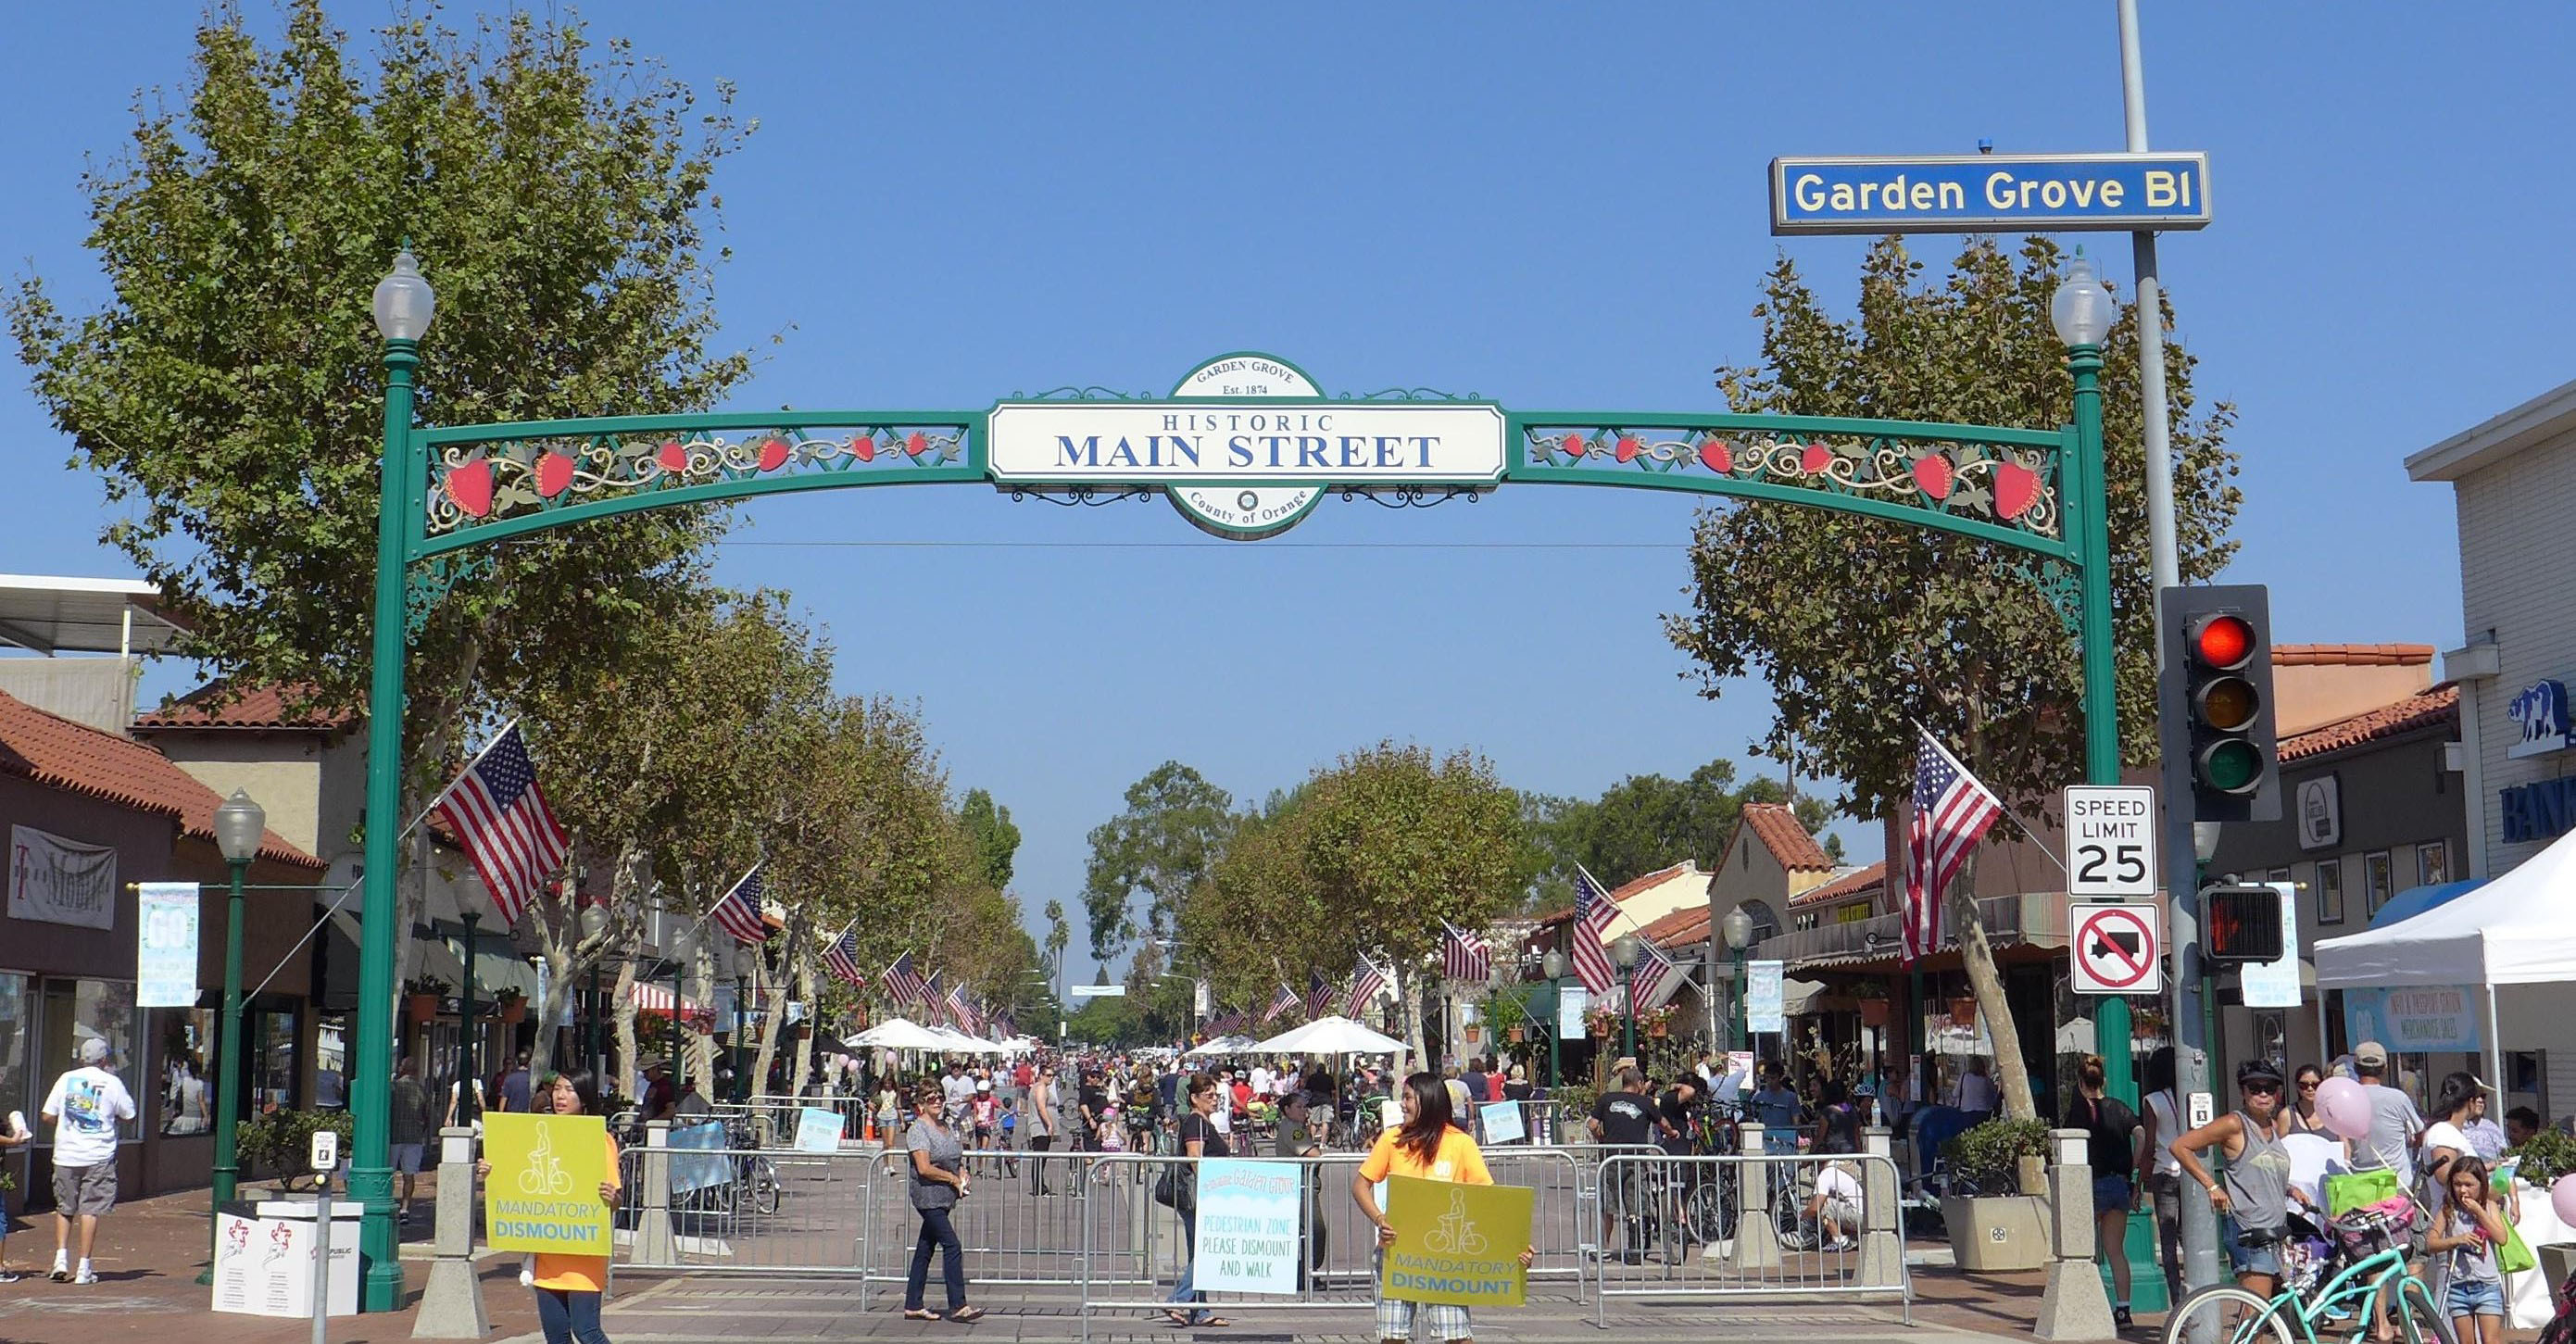 You will have a great time walking by Garden Grove streets.